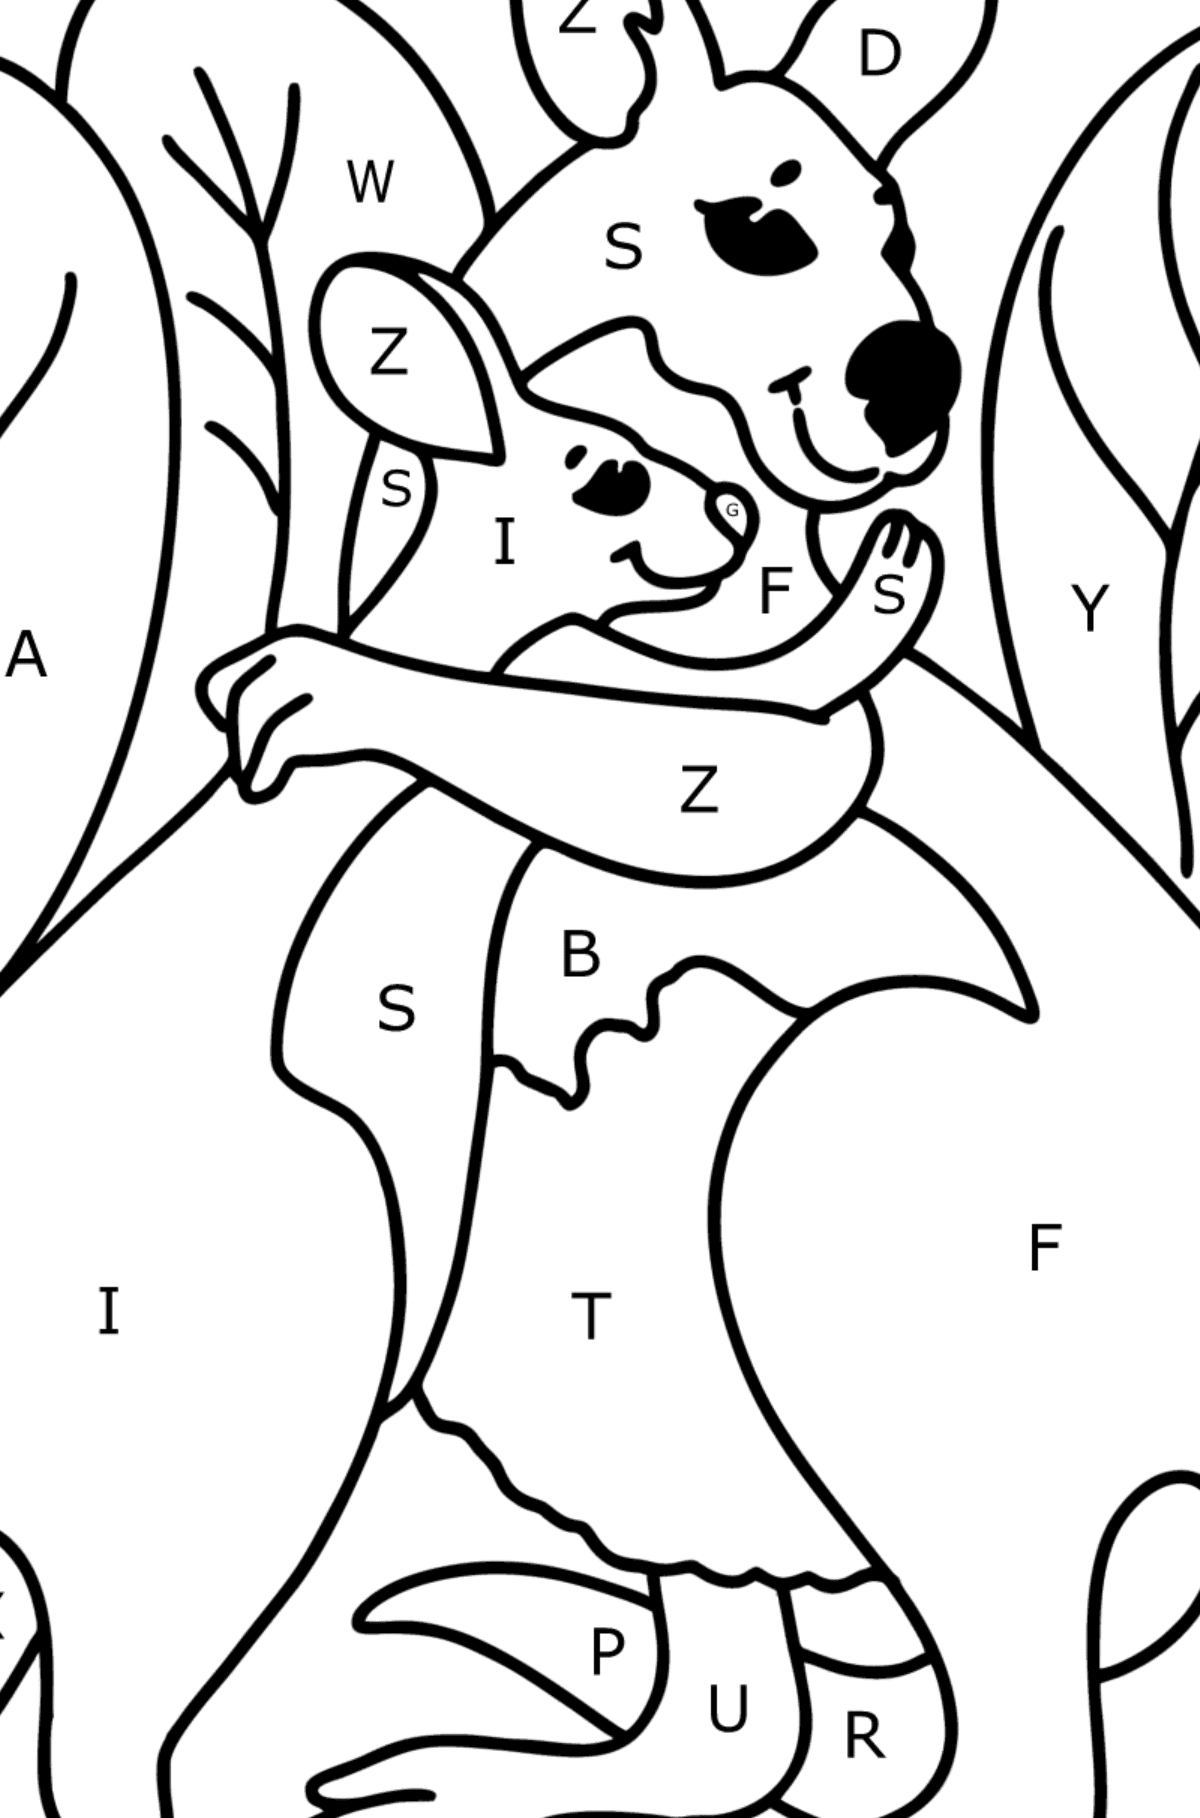 Coloring page - cute kangaroo - Coloring by Letters for Kids